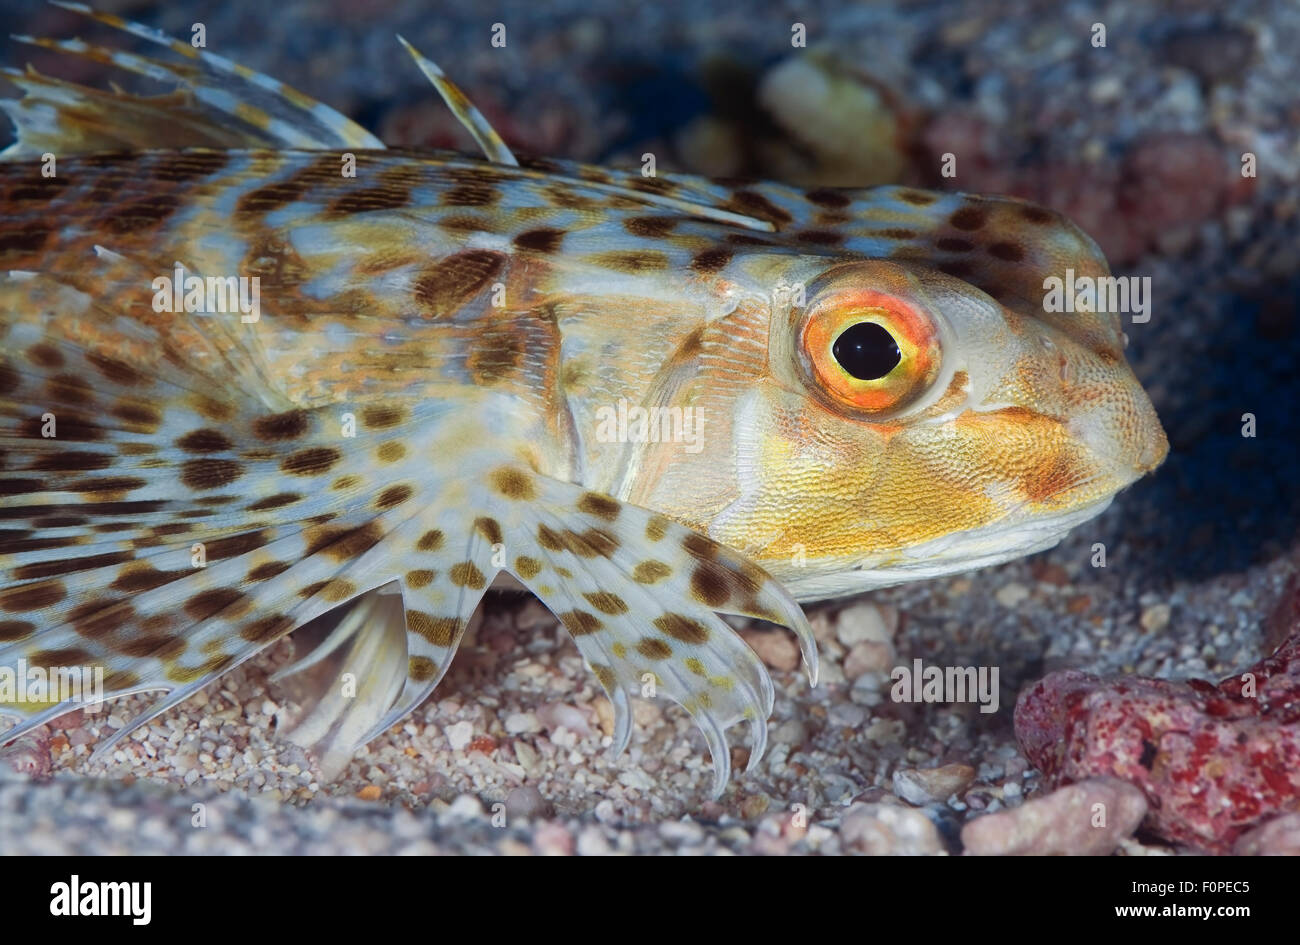 CLOSE-UP VIEW OF HELMET GURNARD WAITING ON CORAL REEF BOTTOM Stock Photo